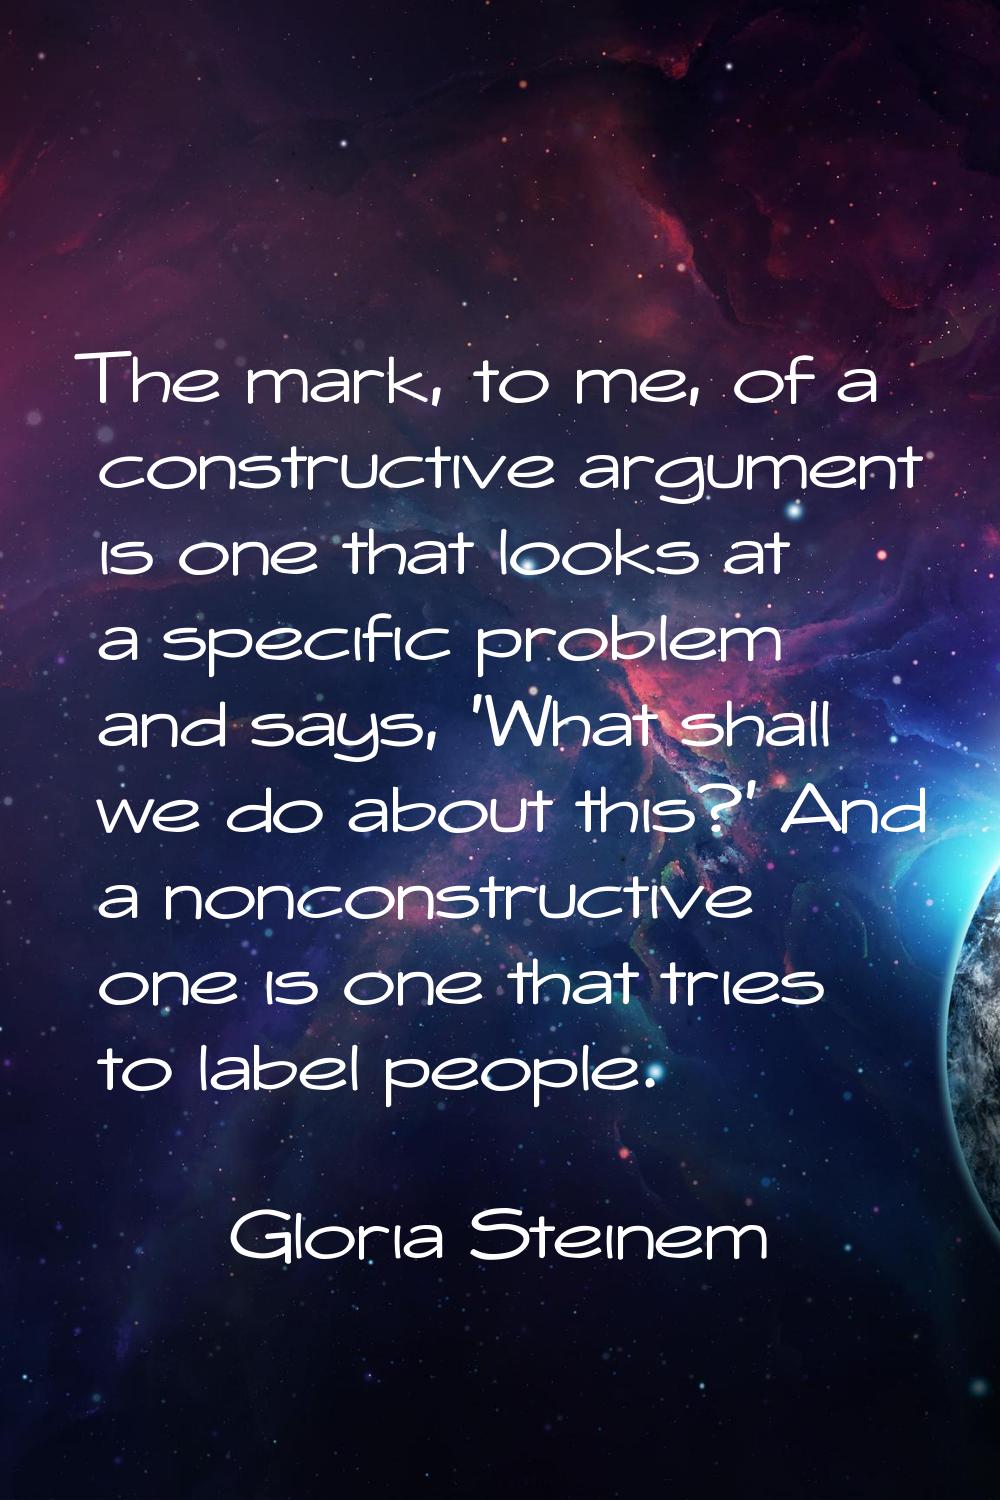 The mark, to me, of a constructive argument is one that looks at a specific problem and says, 'What